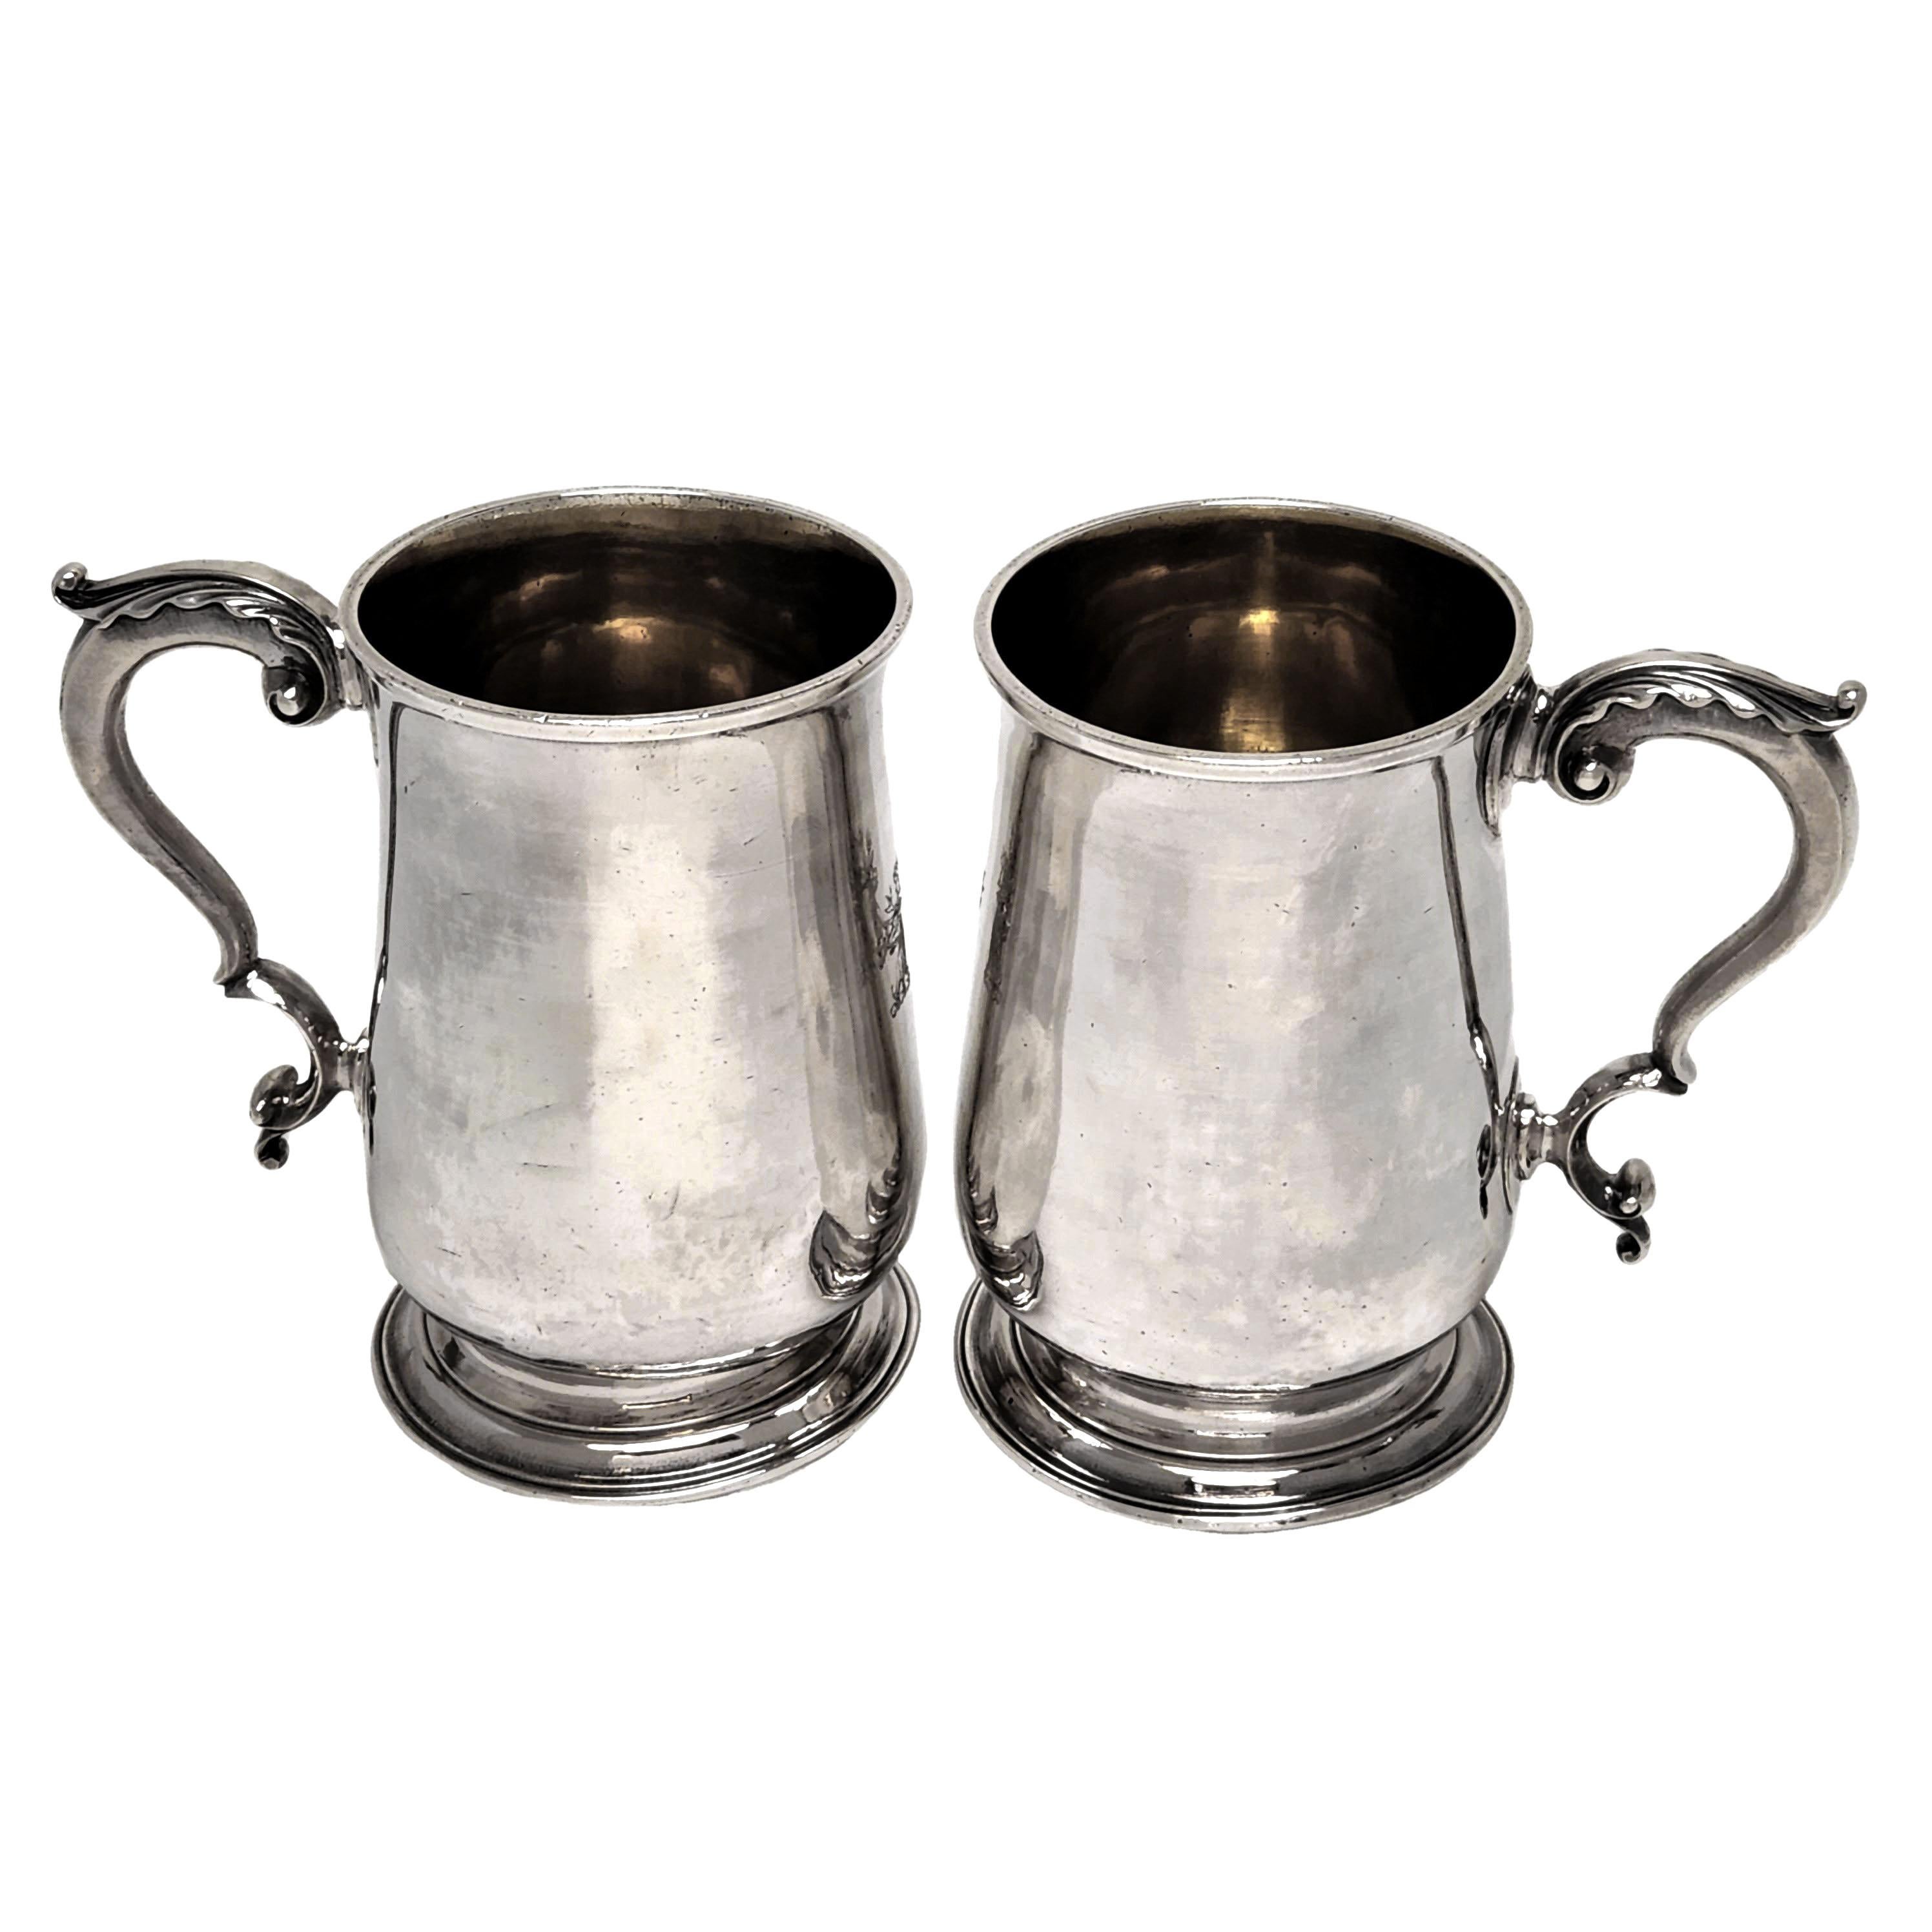 A pair of excellent Antique George III Solid Silver Pint Mugs in a classic Georgian style. The Tankards each stand on a spread pedestal foot and each has a gilded interior. Both Mugs have a small crest engraved opposite the handle. These Mugs have a